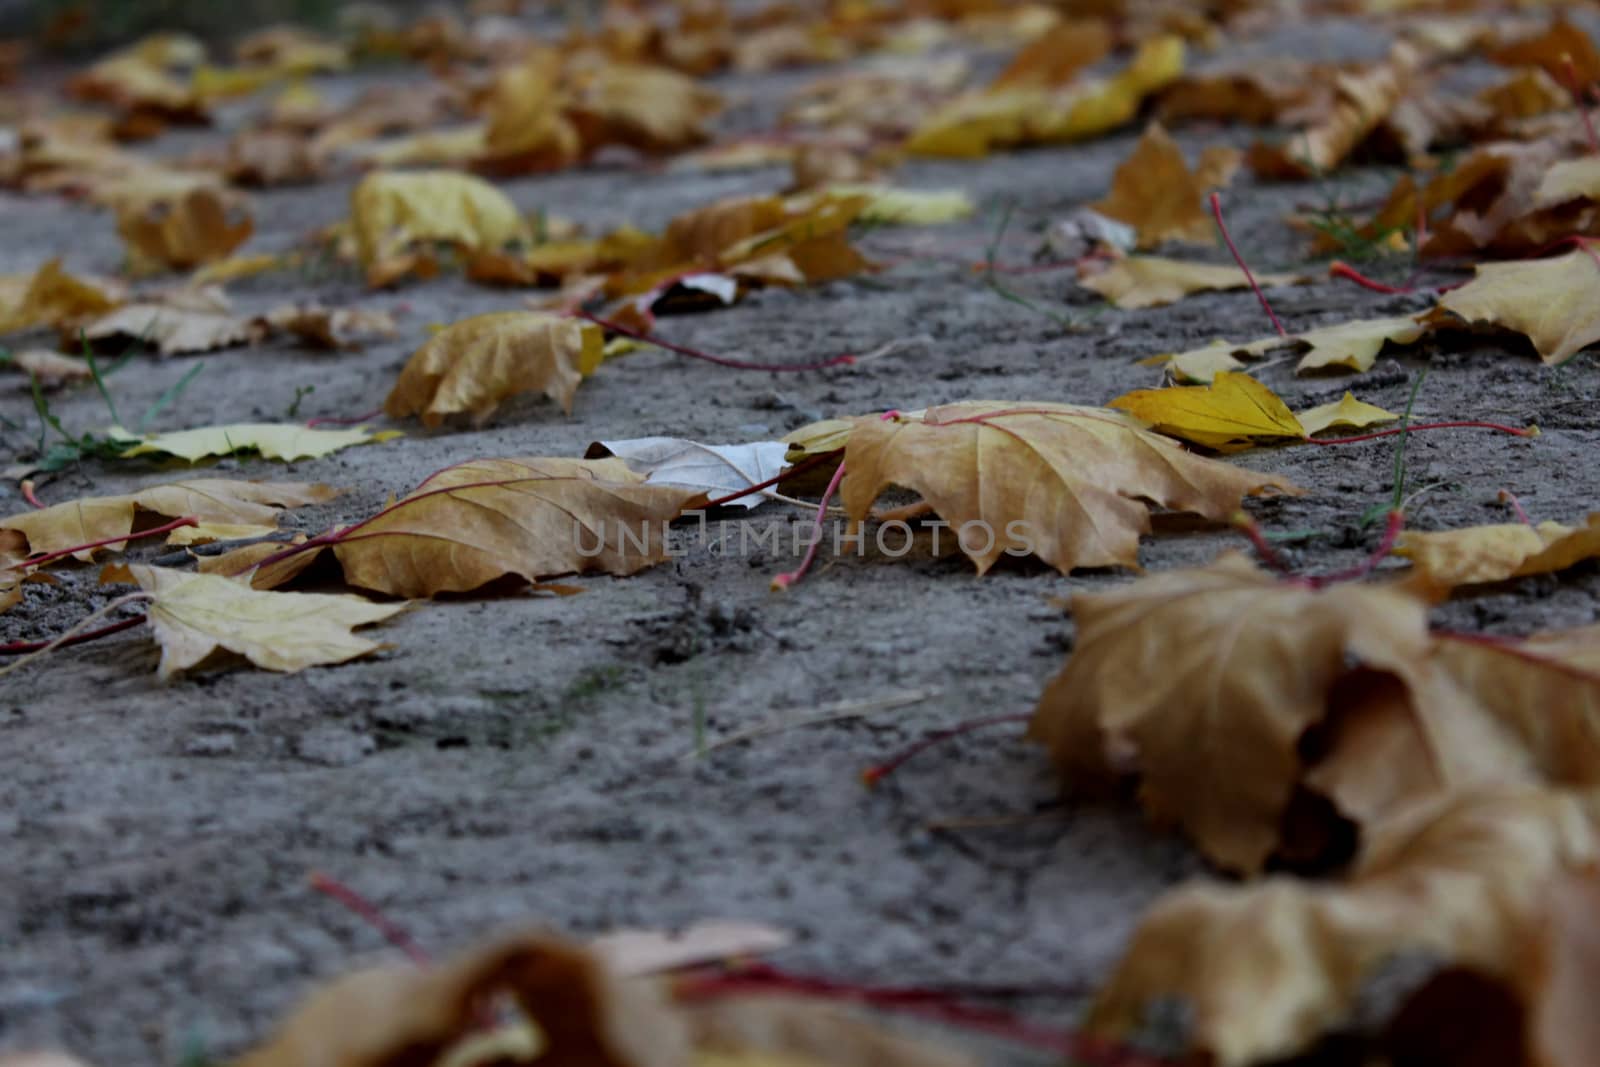 Autumn leaves on the forest floor.